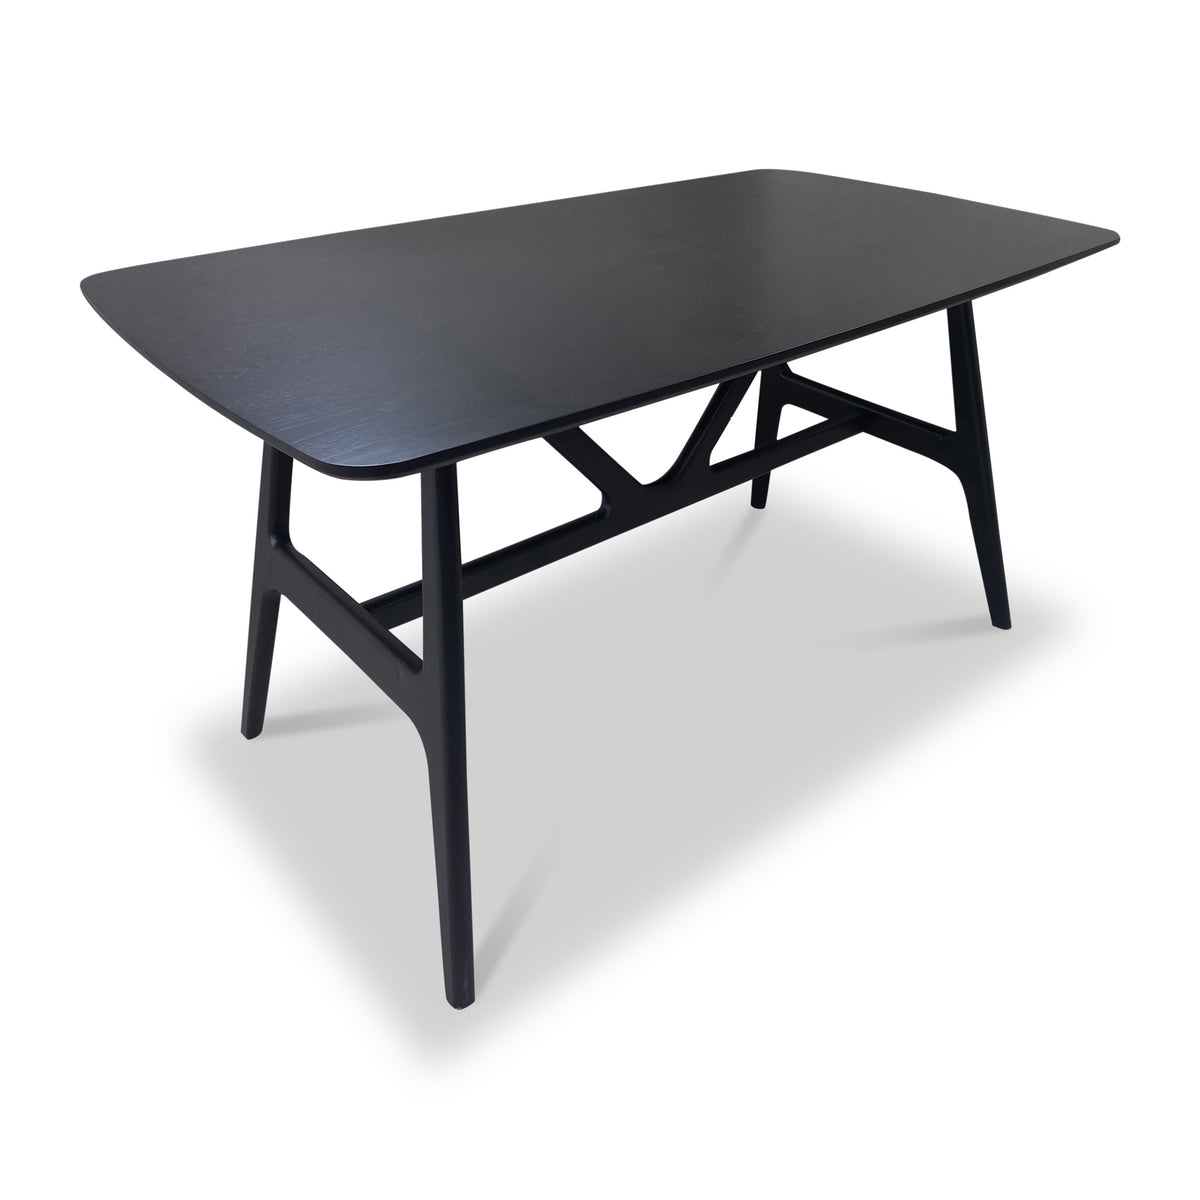 Jackson 135cm Black Dining Table from Roseland Furniture